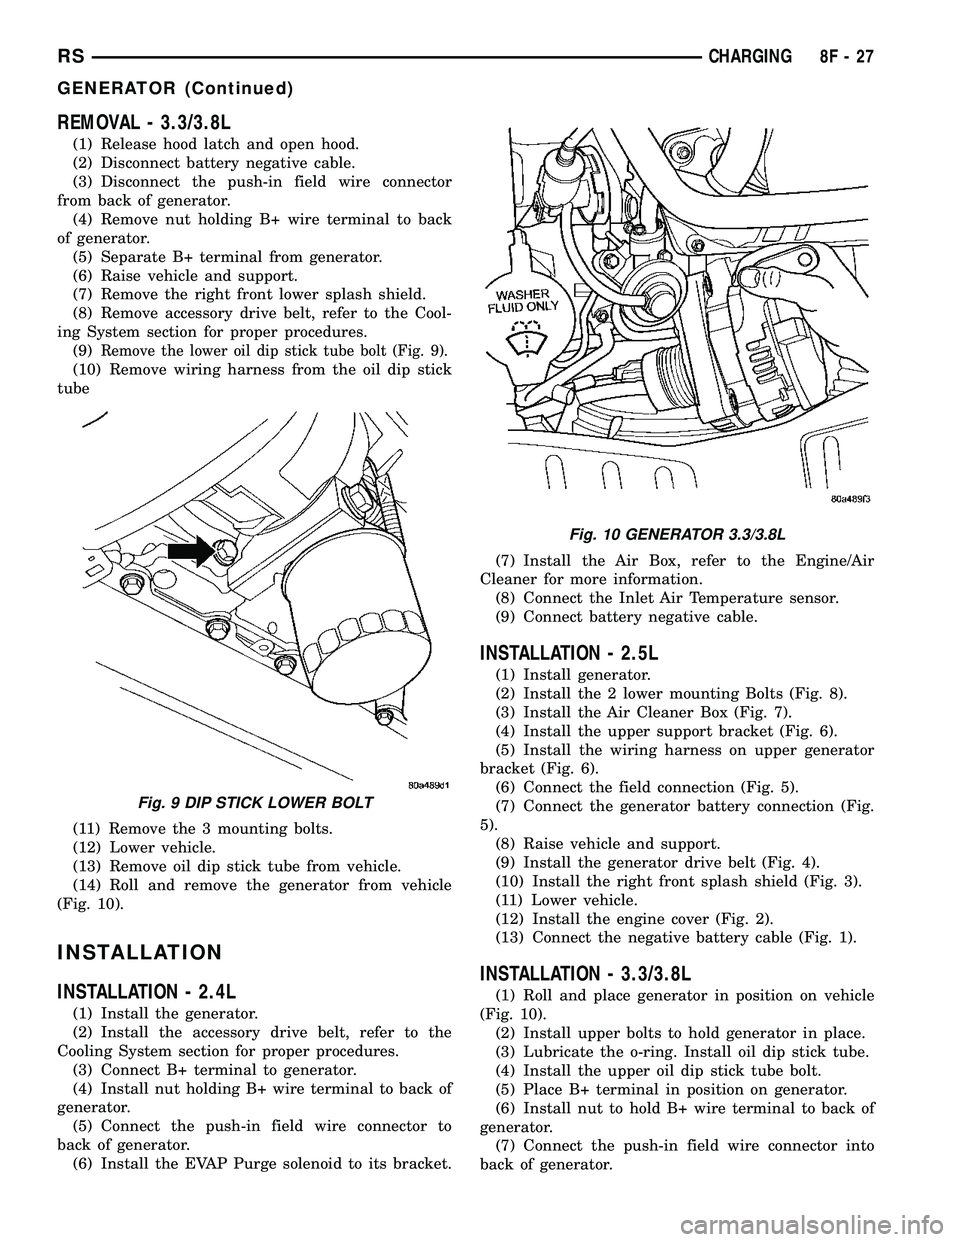 CHRYSLER VOYAGER 2005  Service Manual REMOVAL - 3.3/3.8L
(1) Release hood latch and open hood.
(2) Disconnect battery negative cable.
(3) Disconnect the push-in field wire connector
from back of generator.
(4) Remove nut holding B+ wire t